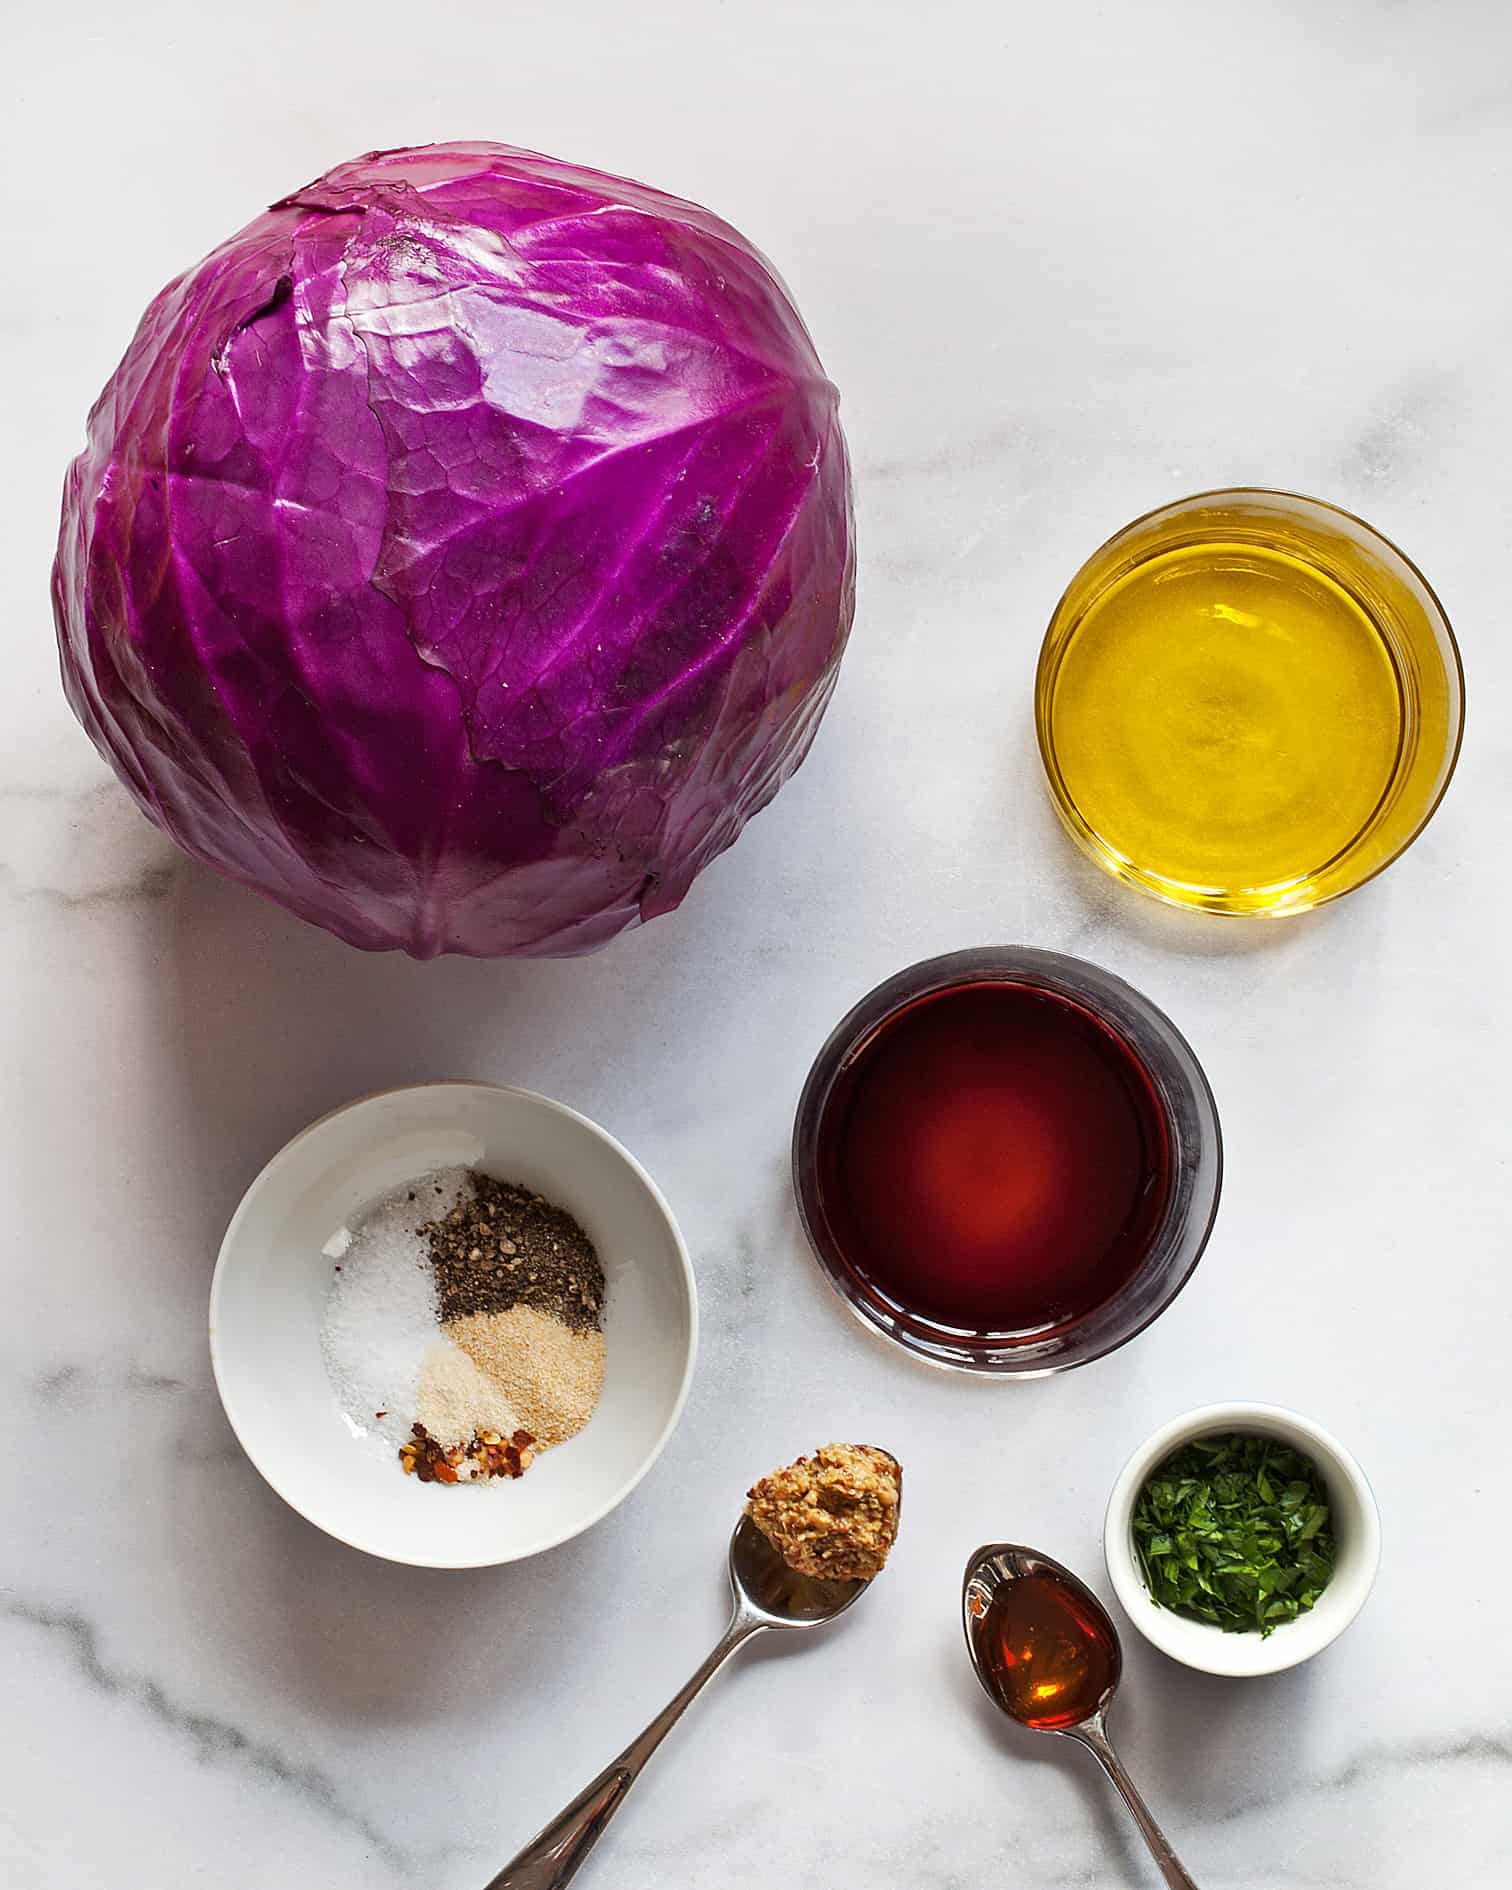 Ingredients including red cabbage, oil, balsamic vinegar, mustard, spices and parsley.